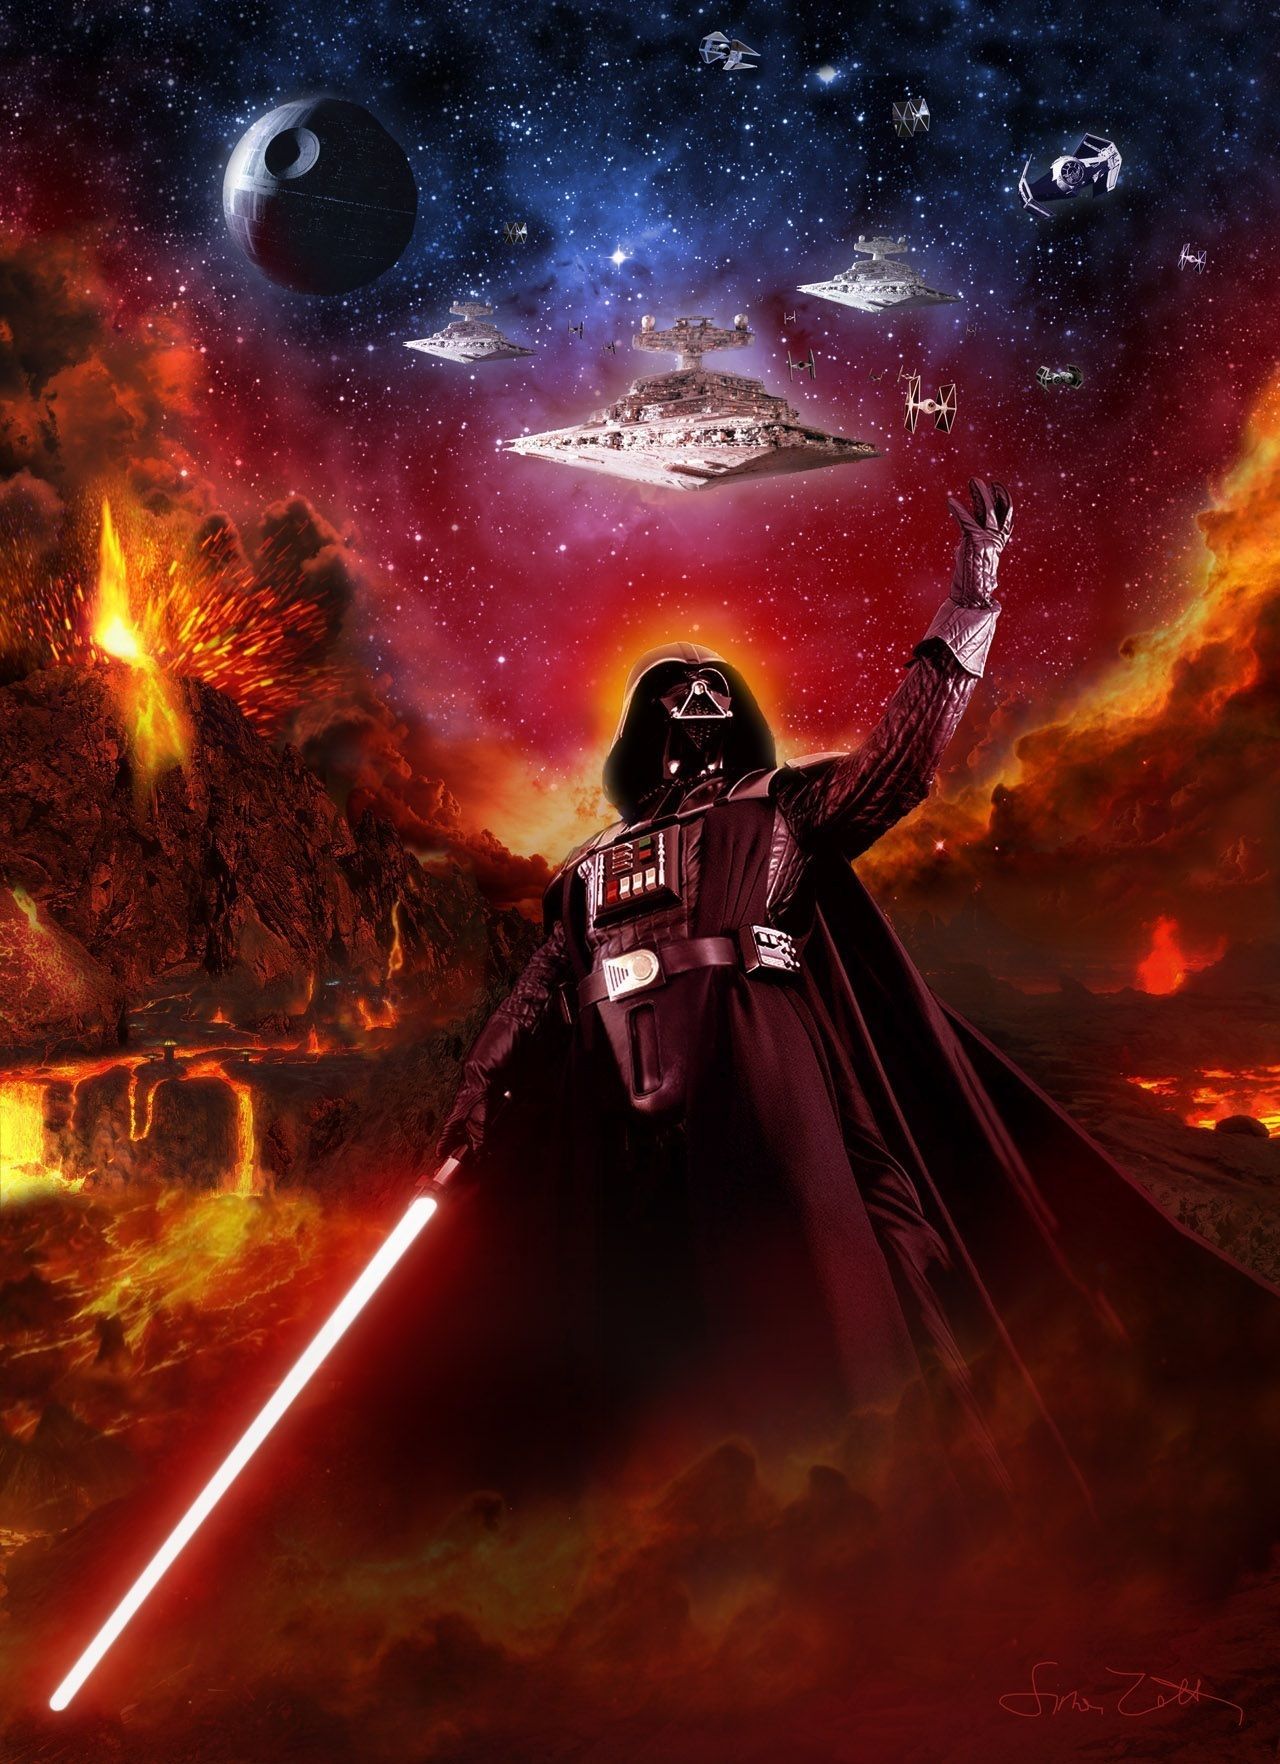 Is anyone else obsessed with Darth Vader?. Star wars poster, Star wars wallpaper, Star wars image